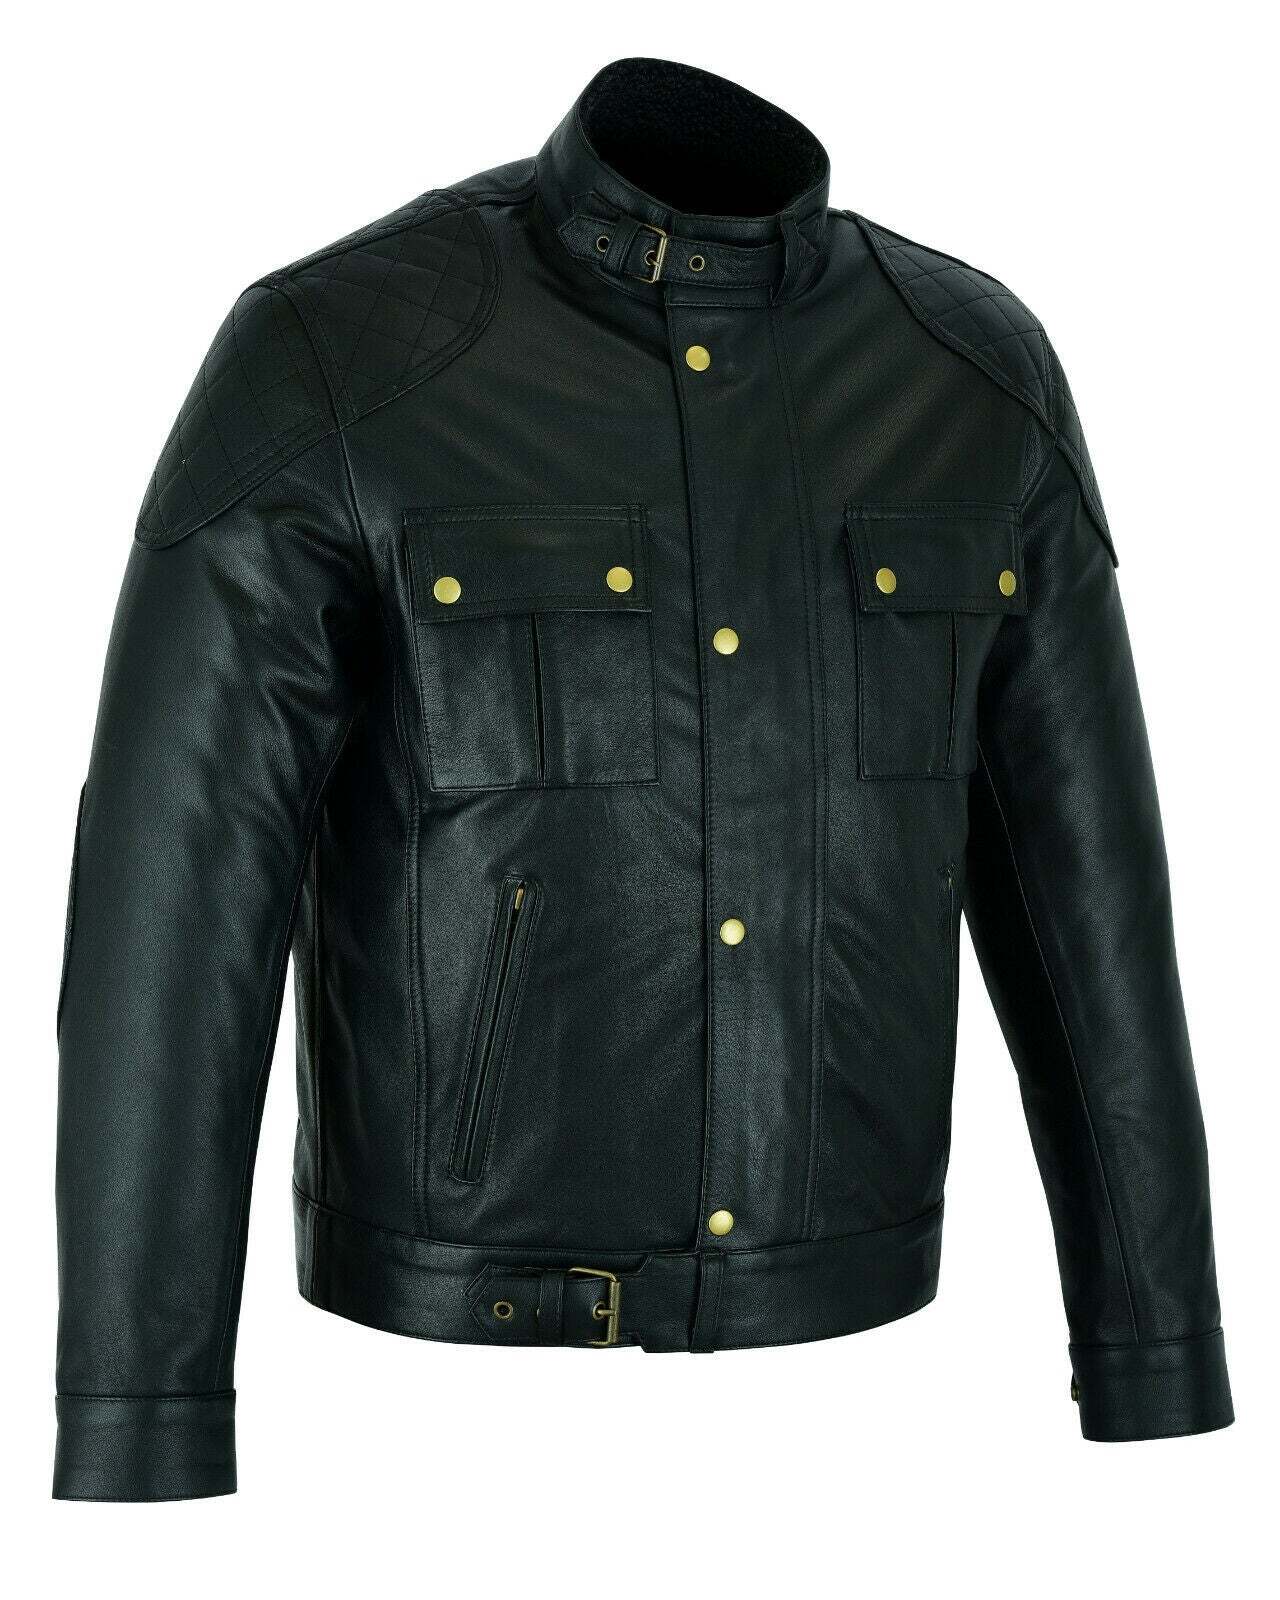 Mens Soft Cowhide Fashion Leather Jacket Biker Style with Fur & Armour Pockets